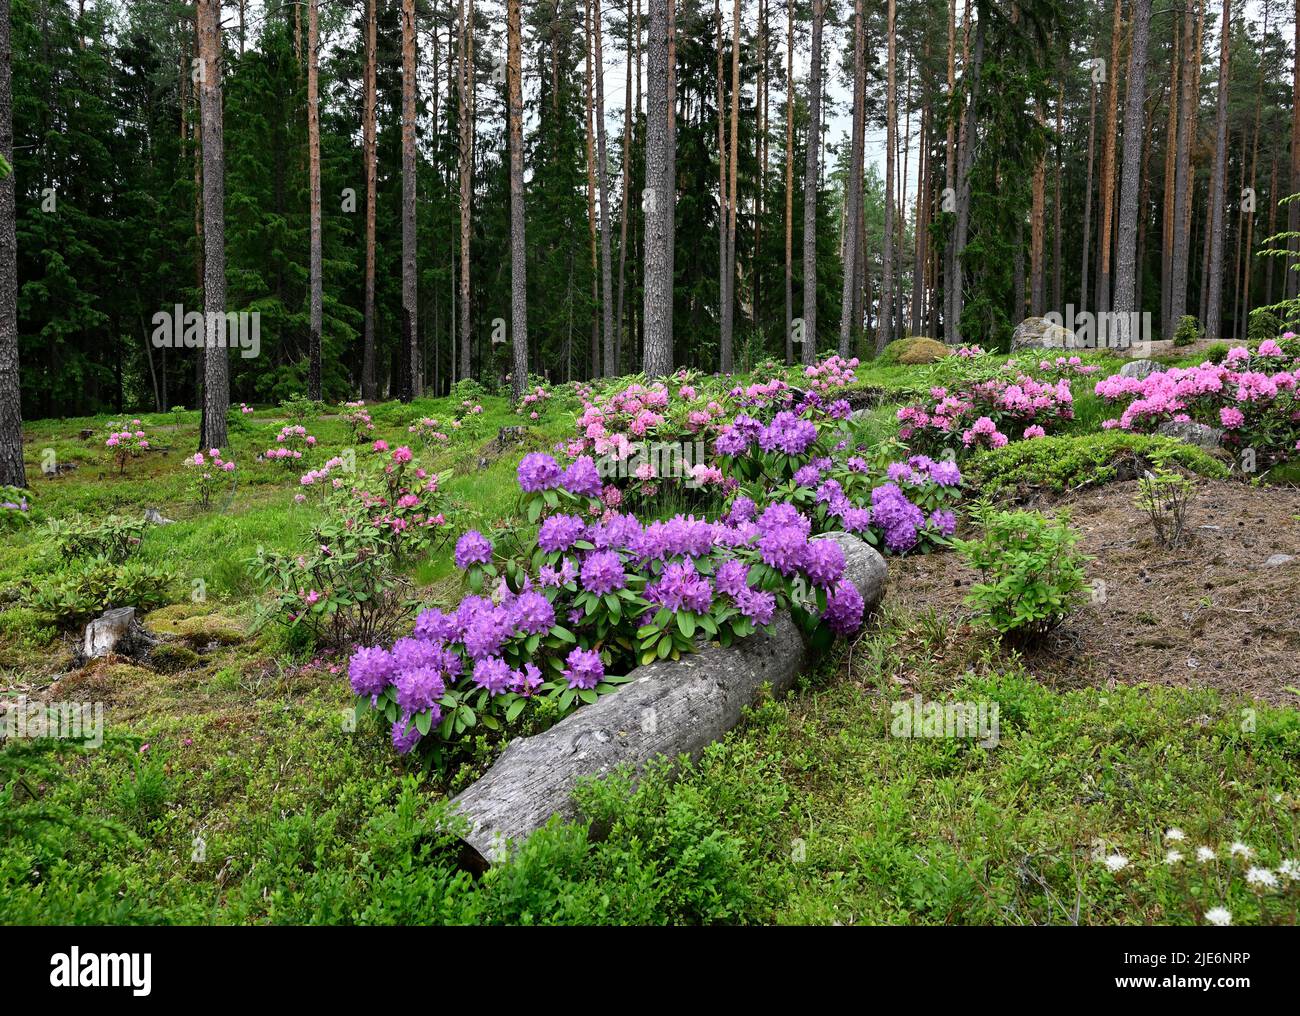 blooming rhododendrons in the park Ilolan Arboretum in Finland Stock Photo